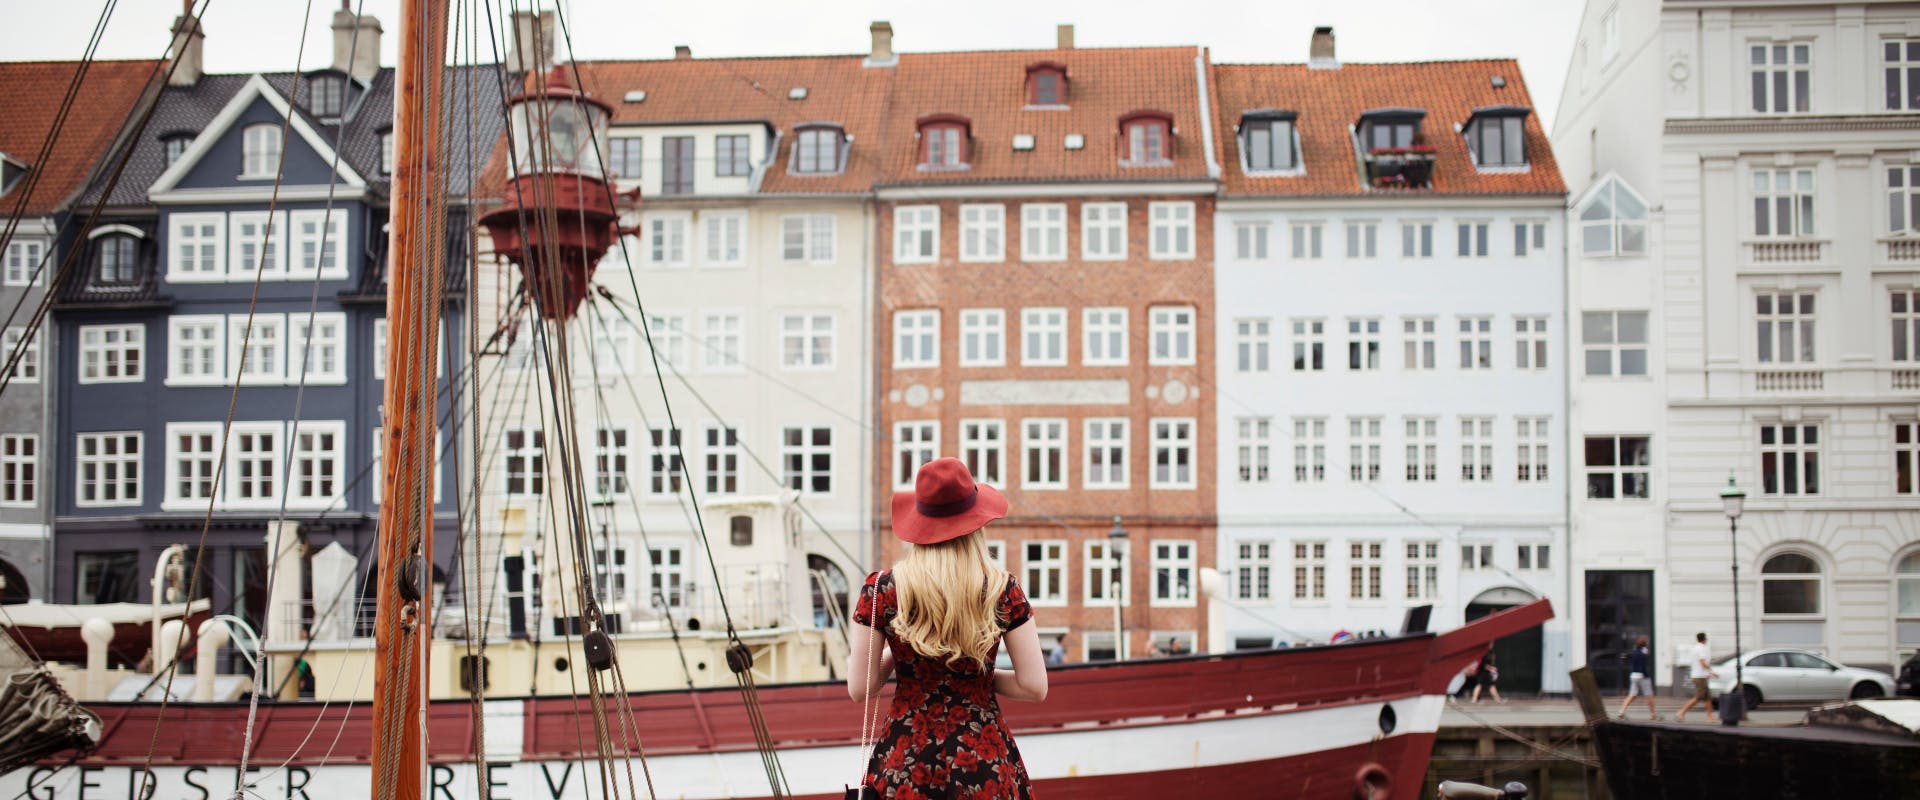 a solo female traveler looking a room of Copenhagen houses by the docks